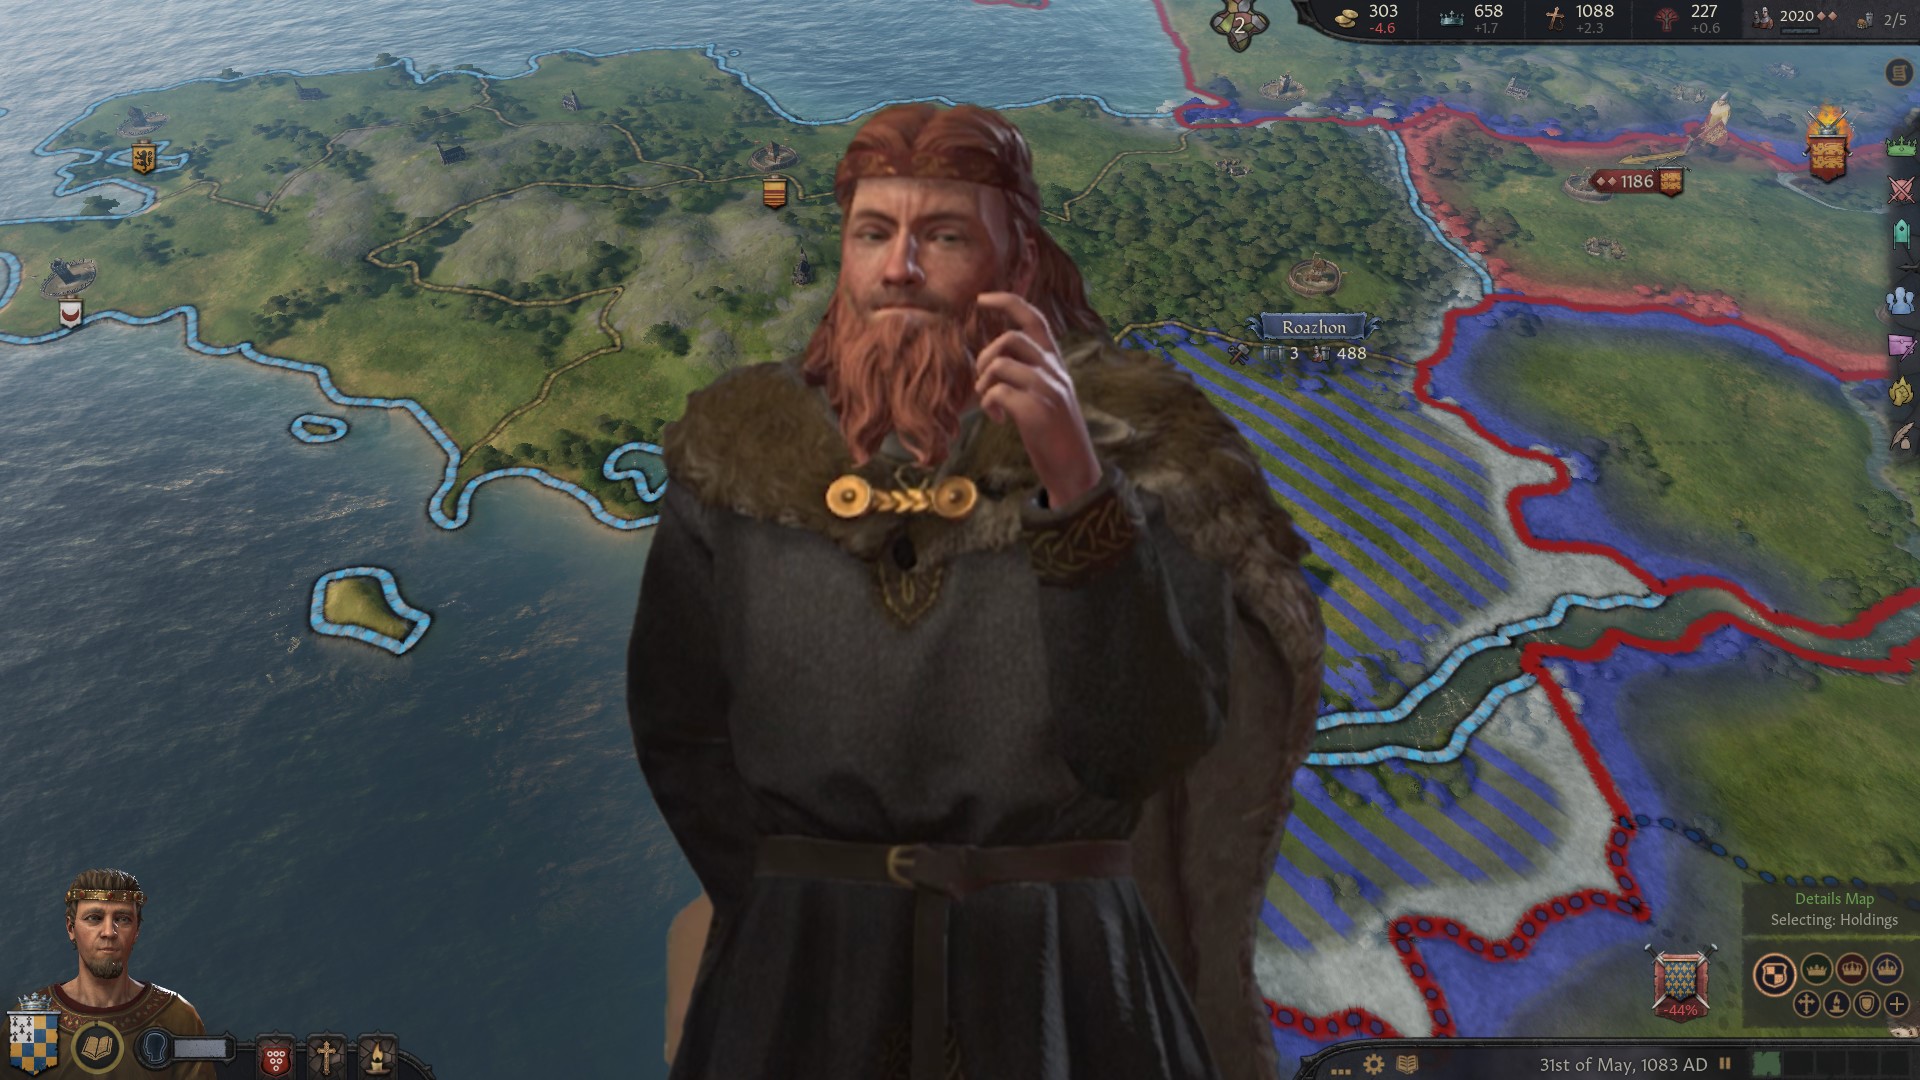 Legends of Crusader Kings 3 aims to make grand strategy approachable